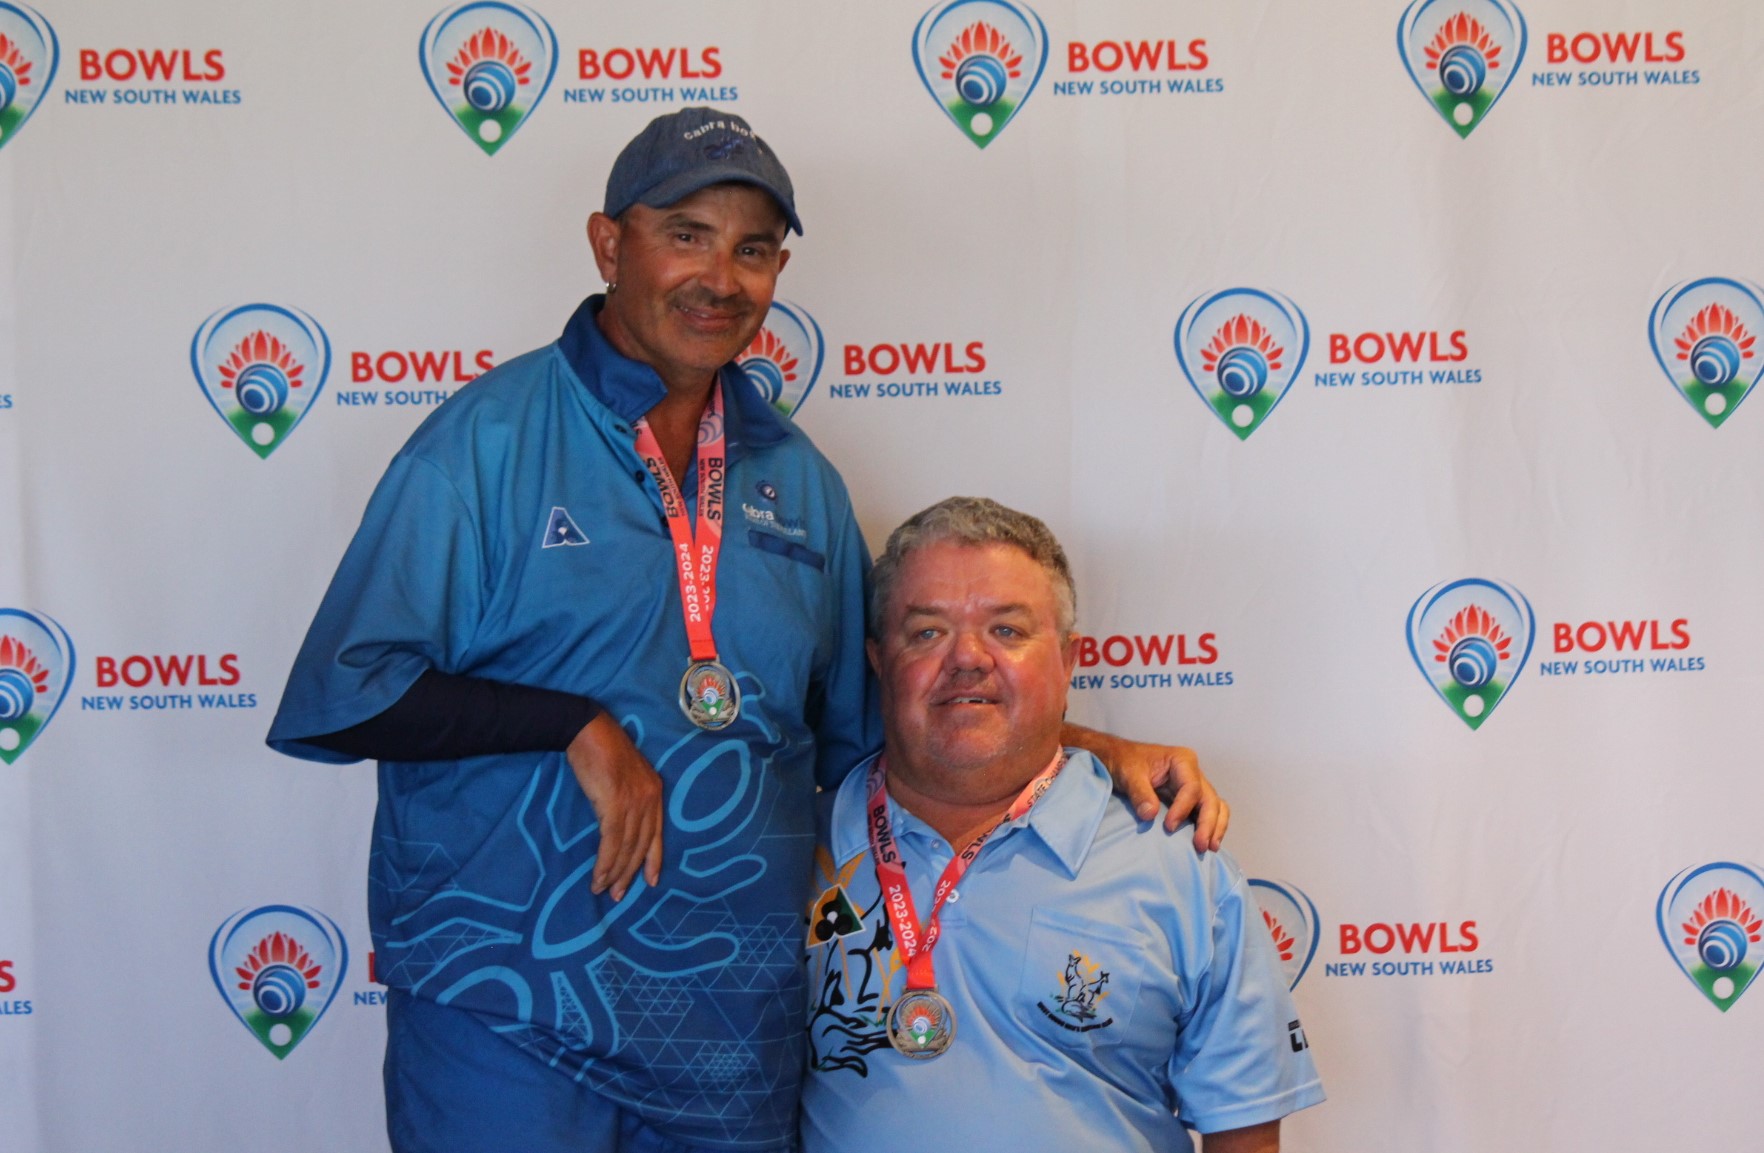 Michael Vassallo and Anthony Brown - Multi-disability State Pairs Runners up